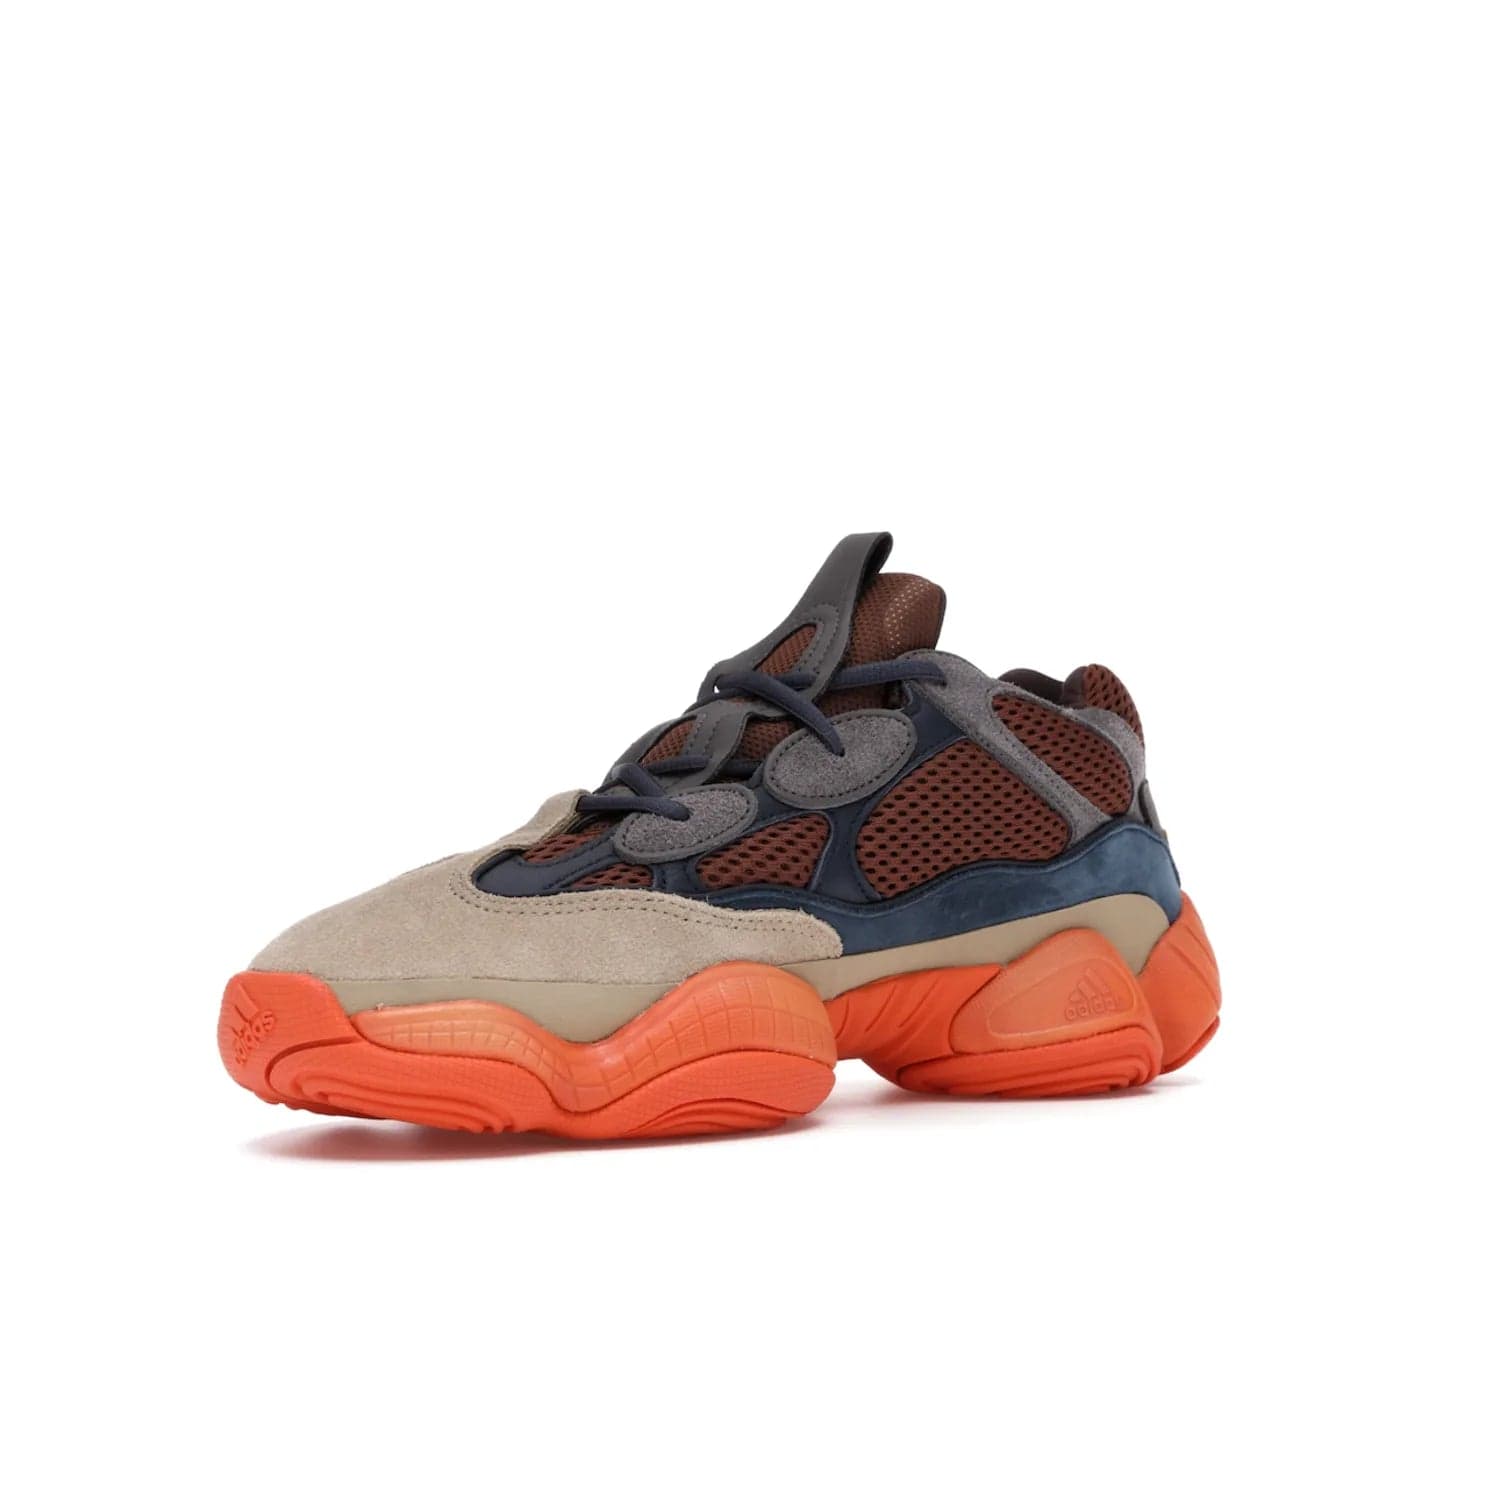 adidas Yeezy 500 Enflame - Image 15 - Only at www.BallersClubKickz.com - Step into style with the adidas Yeezy 500 Enflame. Mix of mesh, leather, and suede layered together to create tonal-brown, dark blue, & orange. Orange AdiPRENE sole provides superior cushioning & comfort. Get yours and experience maximum style.